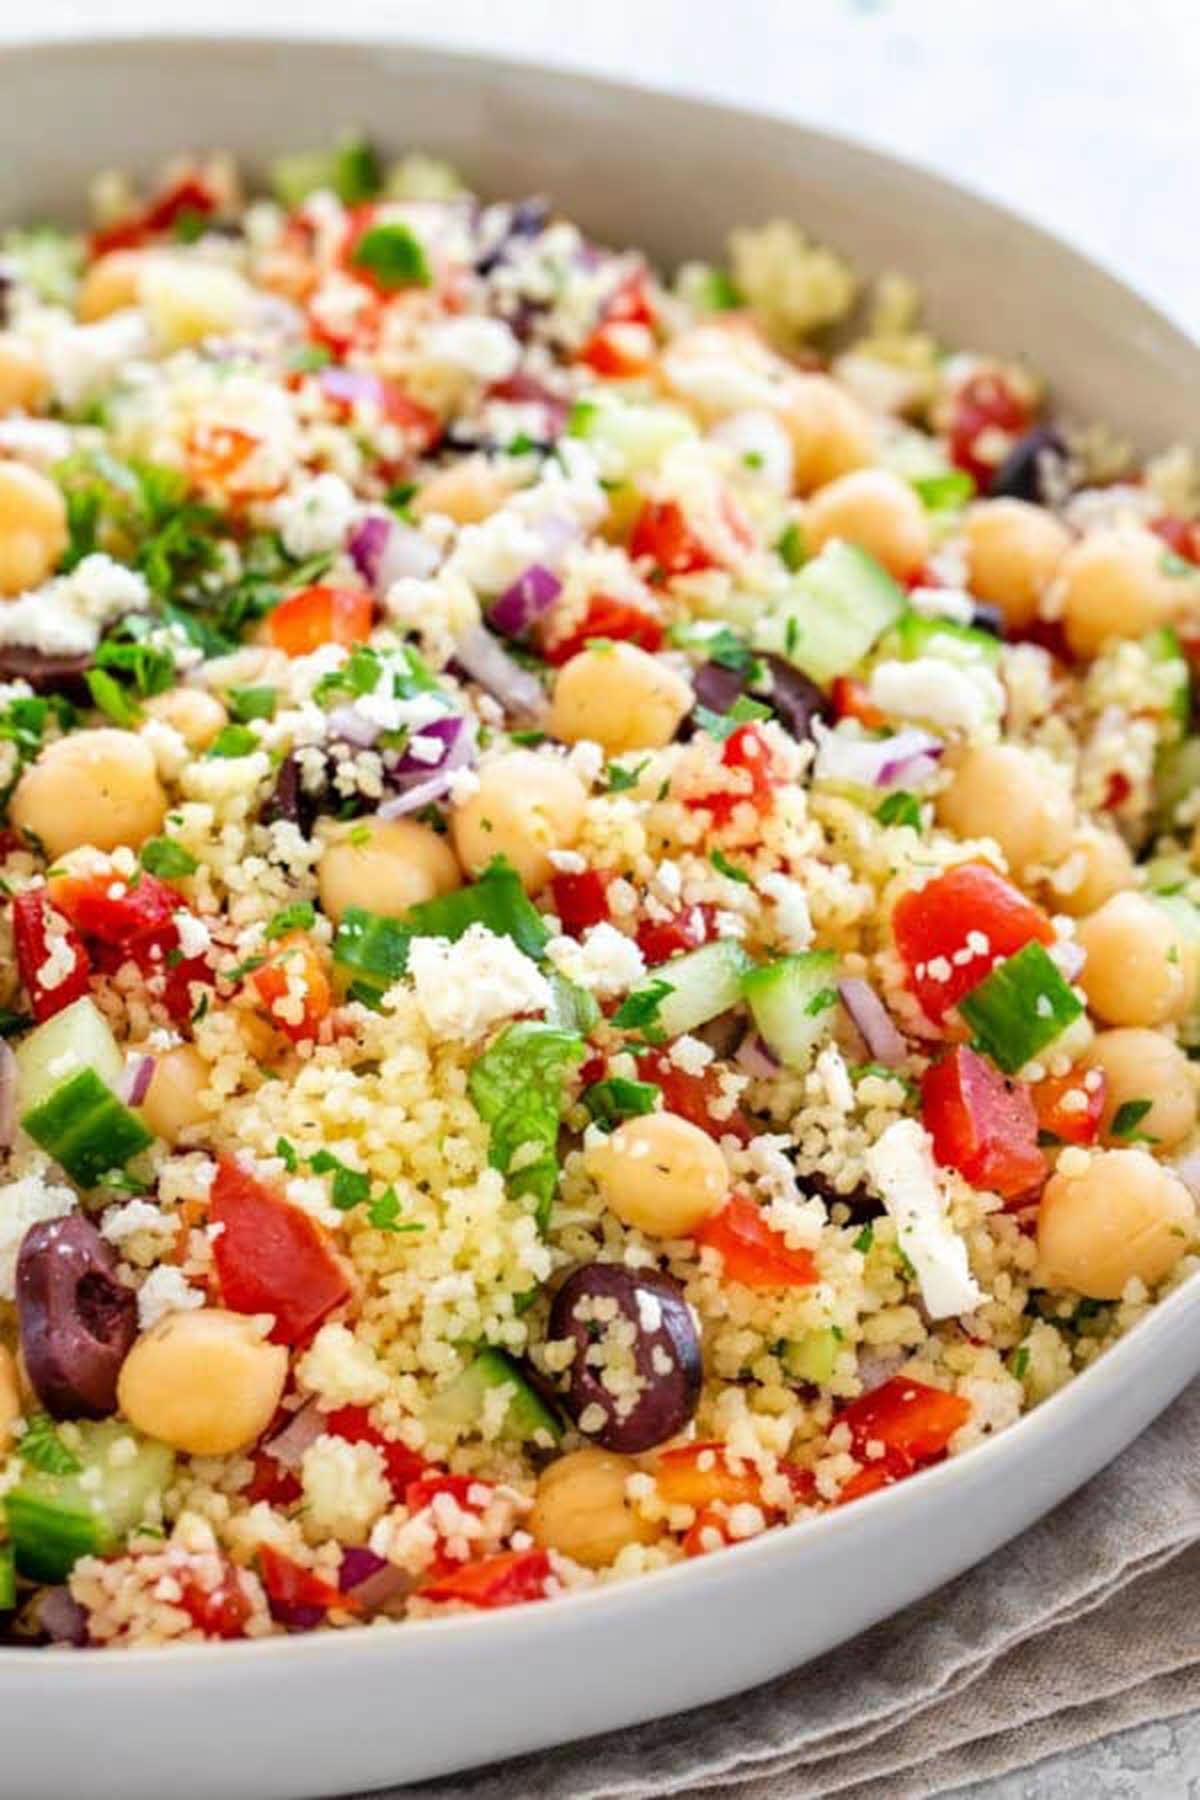 bowl of colorful couscous salad filled with olives, peppers, tomatoes and chickpeas for a mediterranean tast.